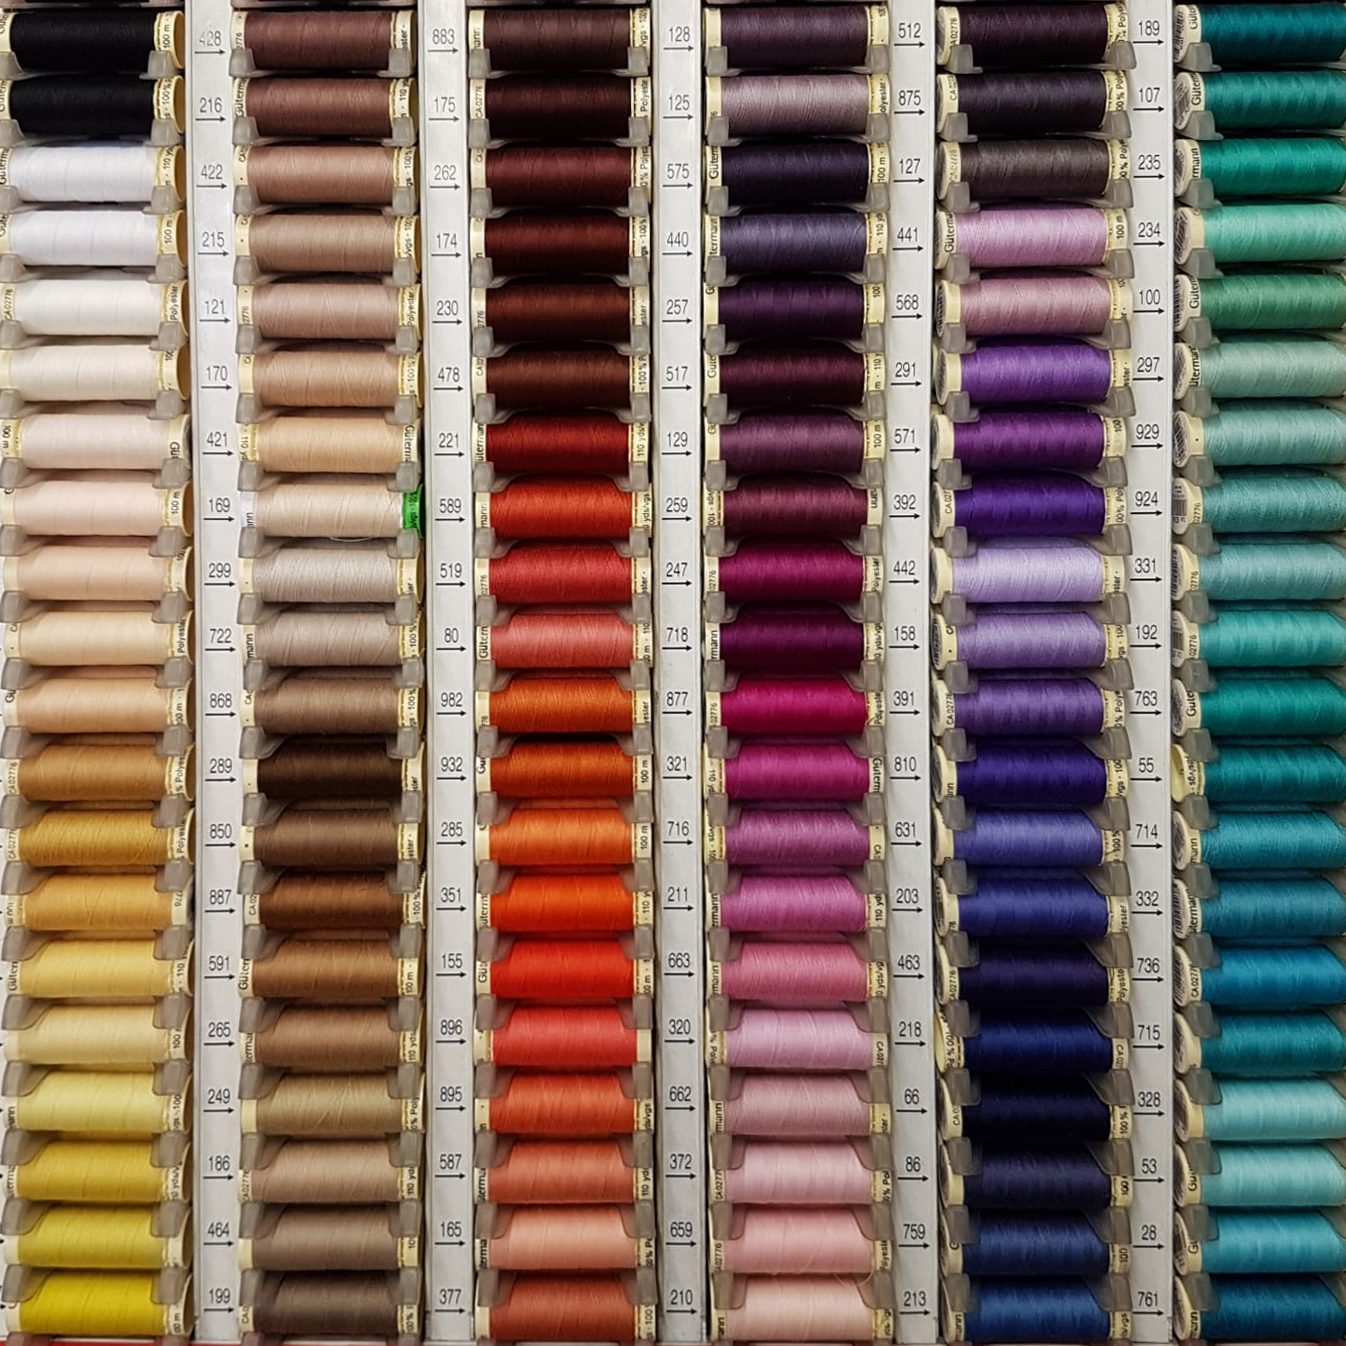 gutermann-polyester-sew-all-thread-100m-317-colours-duttons-for-buttons